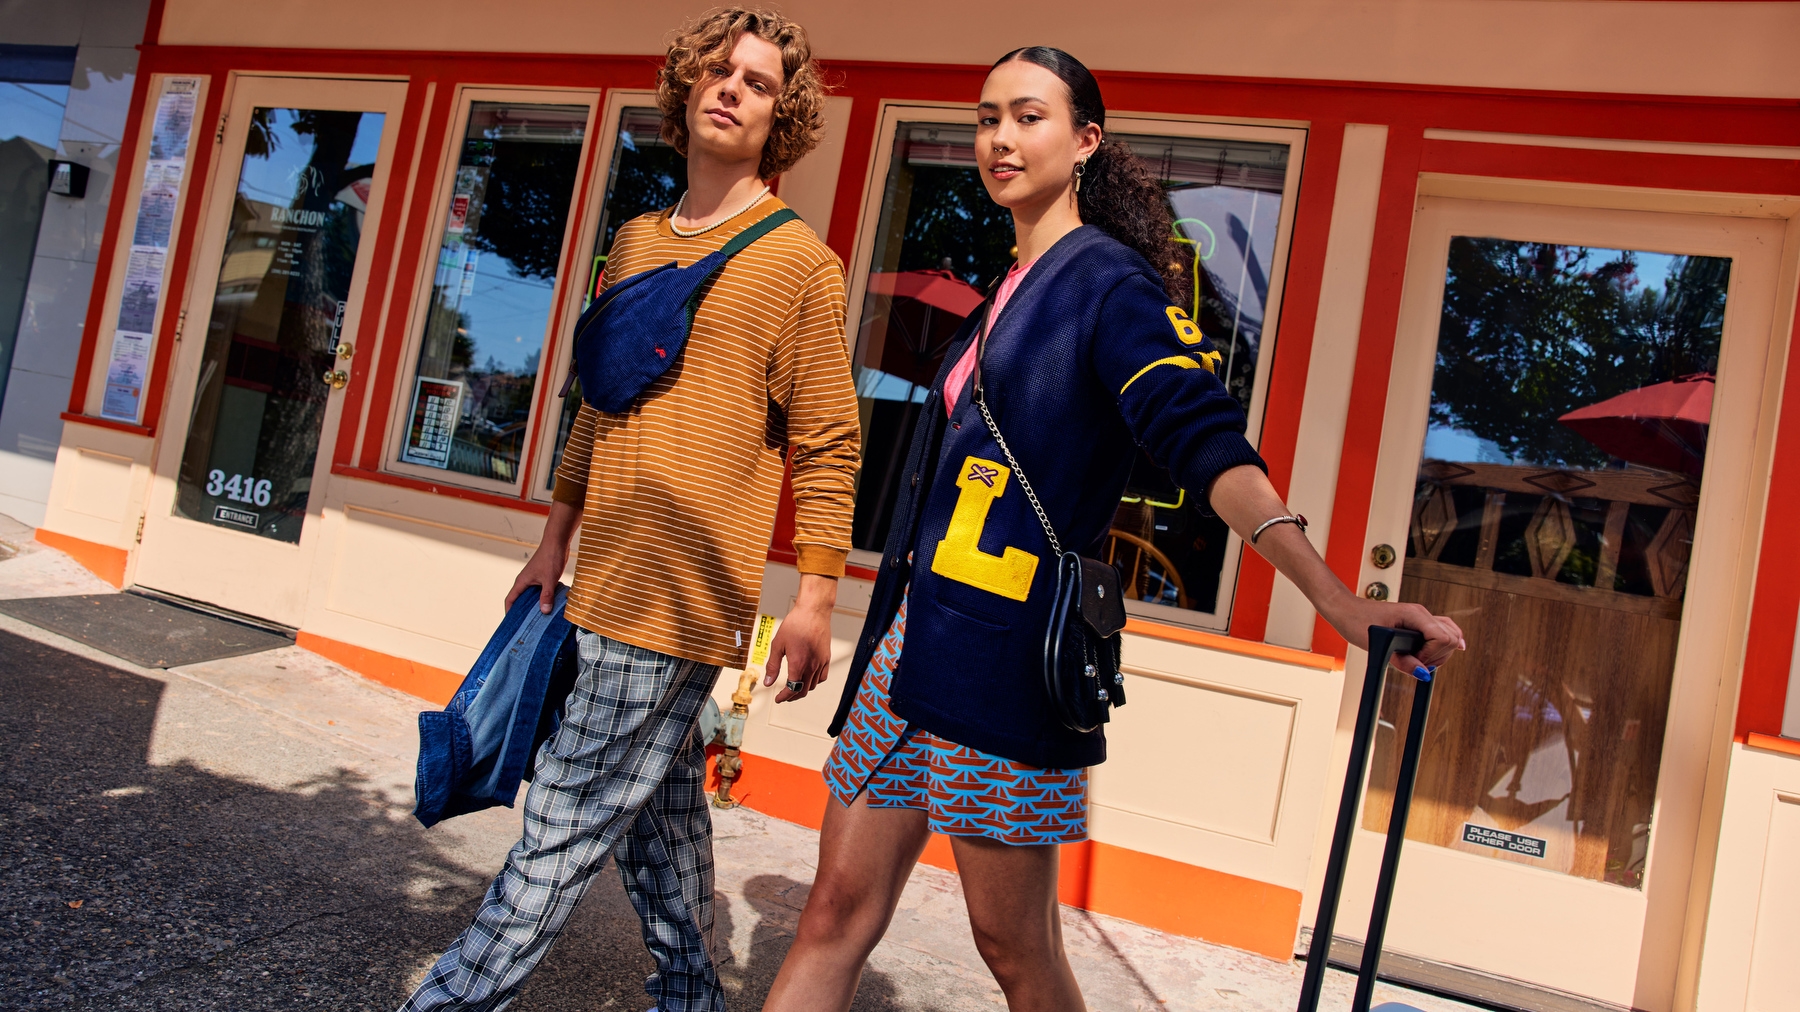 An image of two college students walking out of a store and looking at the camera. They are wearing colorful outfits.  